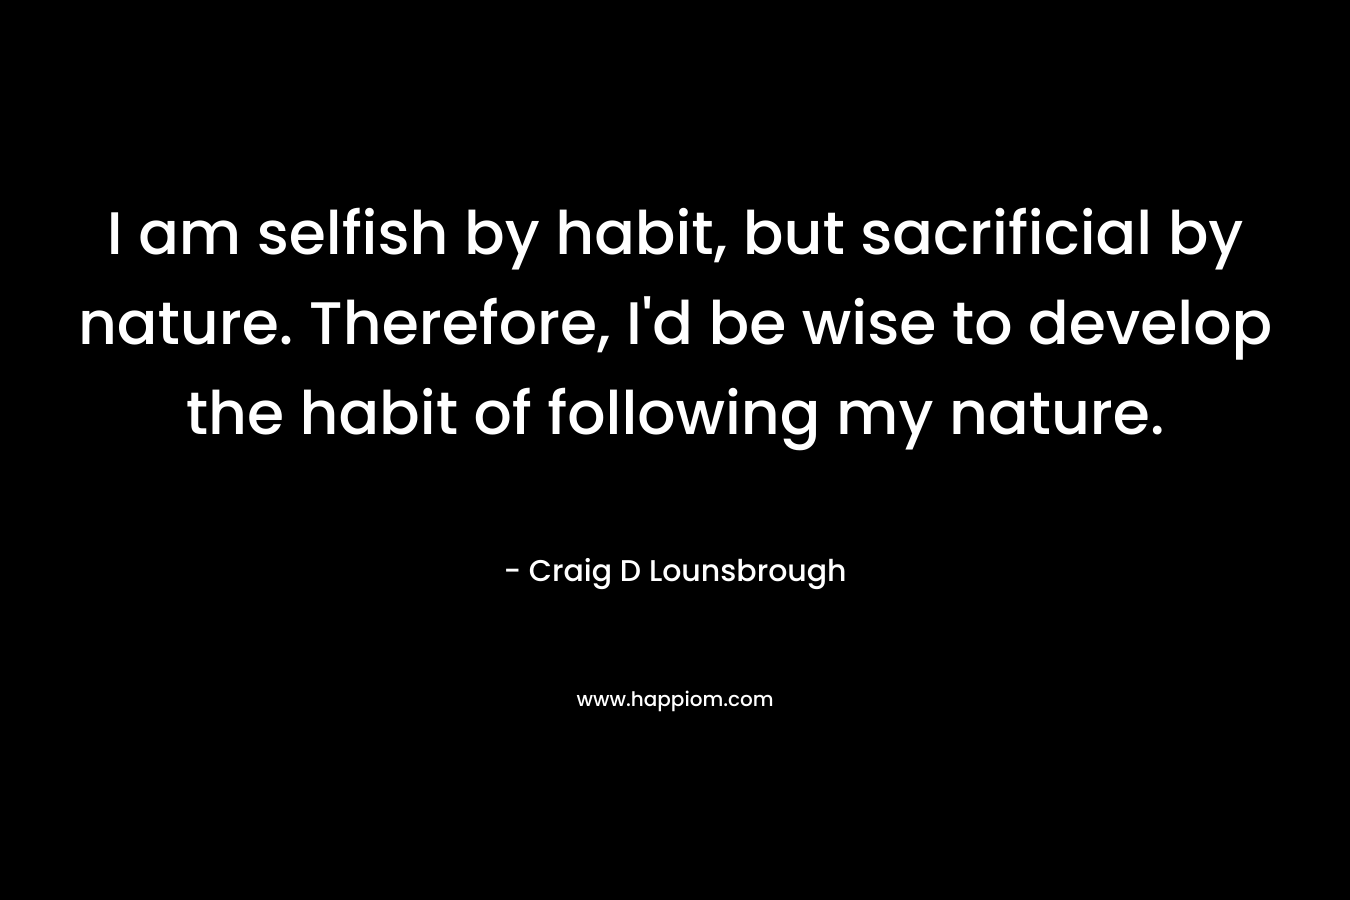 I am selfish by habit, but sacrificial by nature. Therefore, I'd be wise to develop the habit of following my nature.